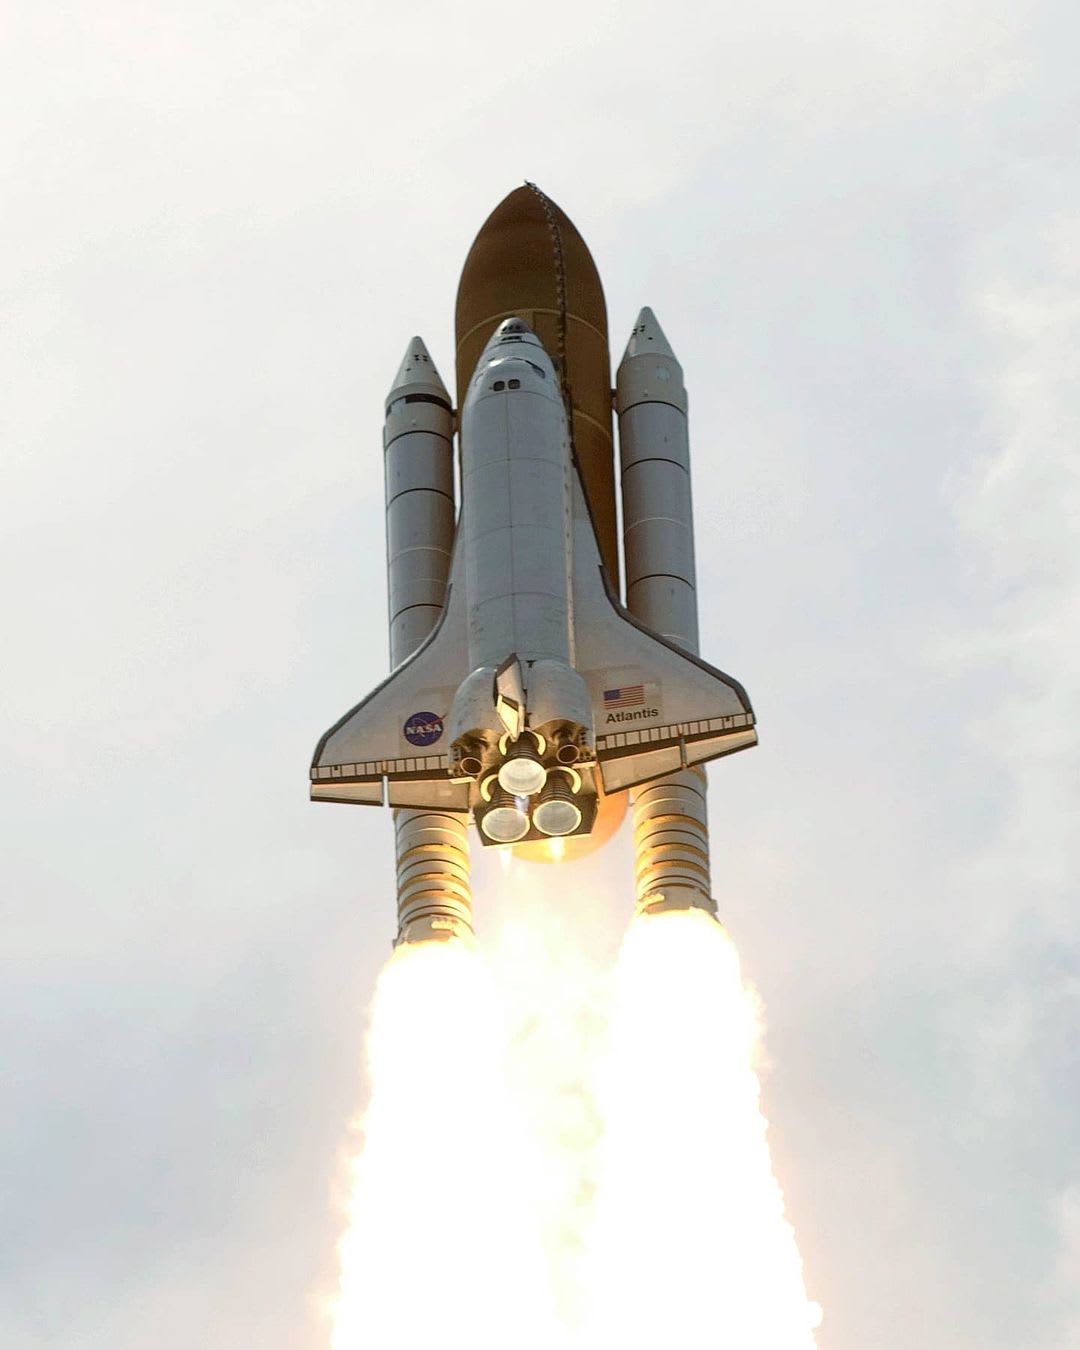 Space Shuttle Atlantis is seen heading to Earth orbit for rendezvous with NASA's Hubble Space Telescope for the STS-125 mission. May 2009